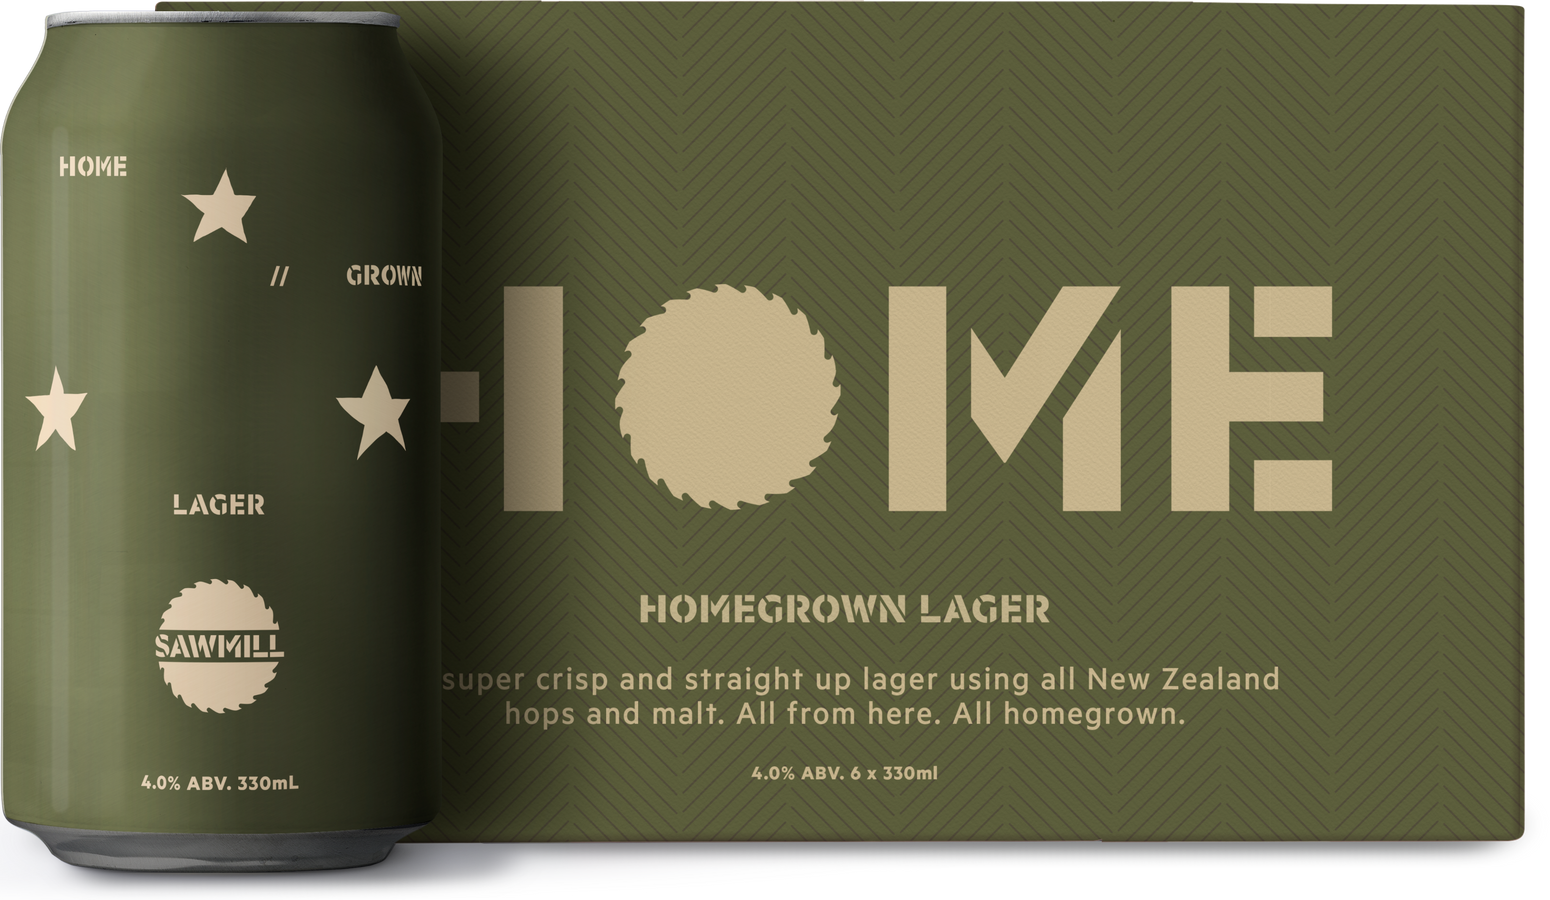 Homegrown Lager